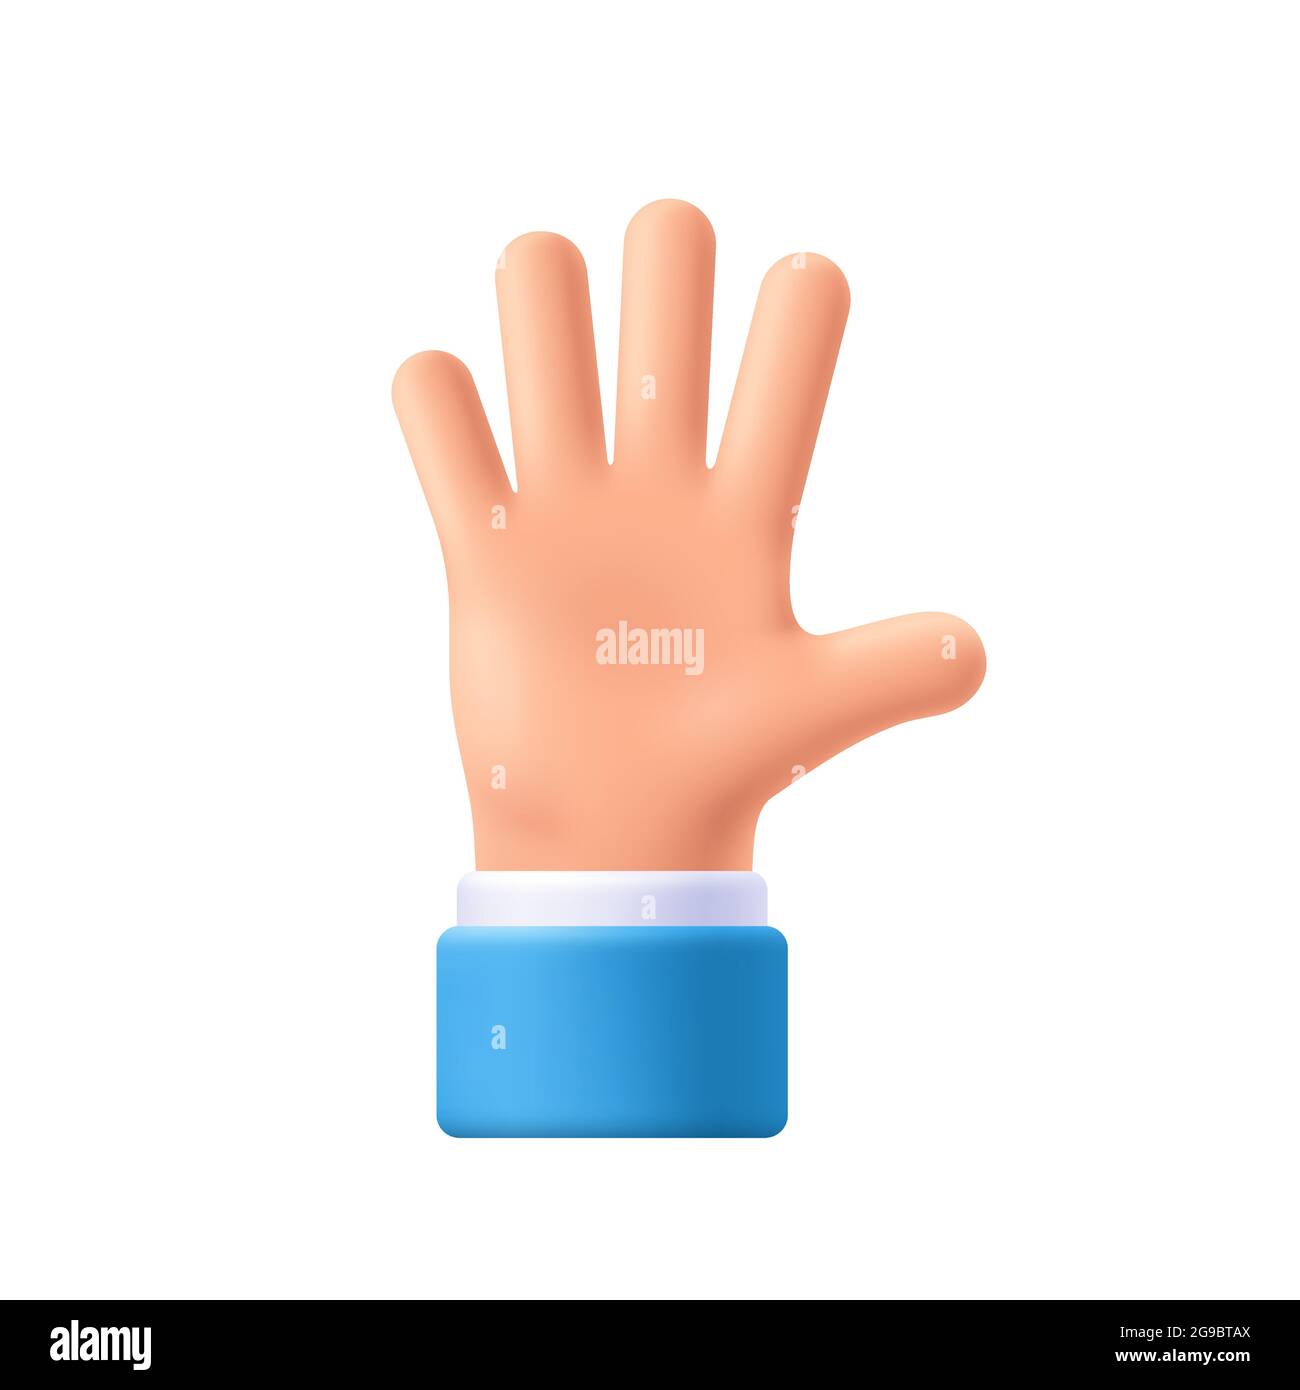 out stretched hand clipart transparent